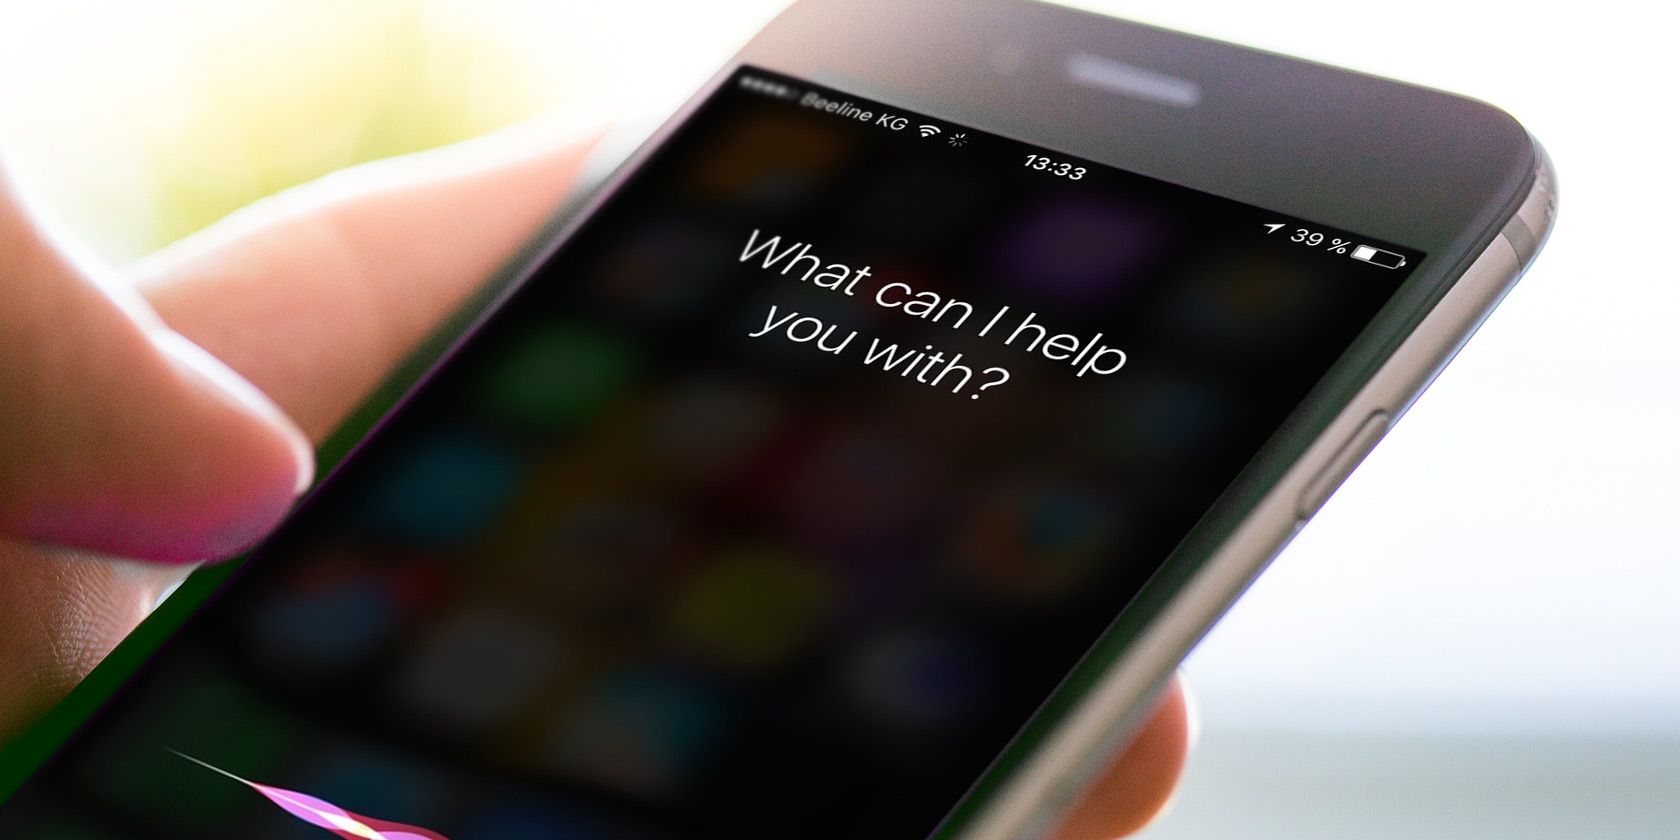  A person holding an iPhone with the voice assistant Siri activated, asking about iPhone tracking.